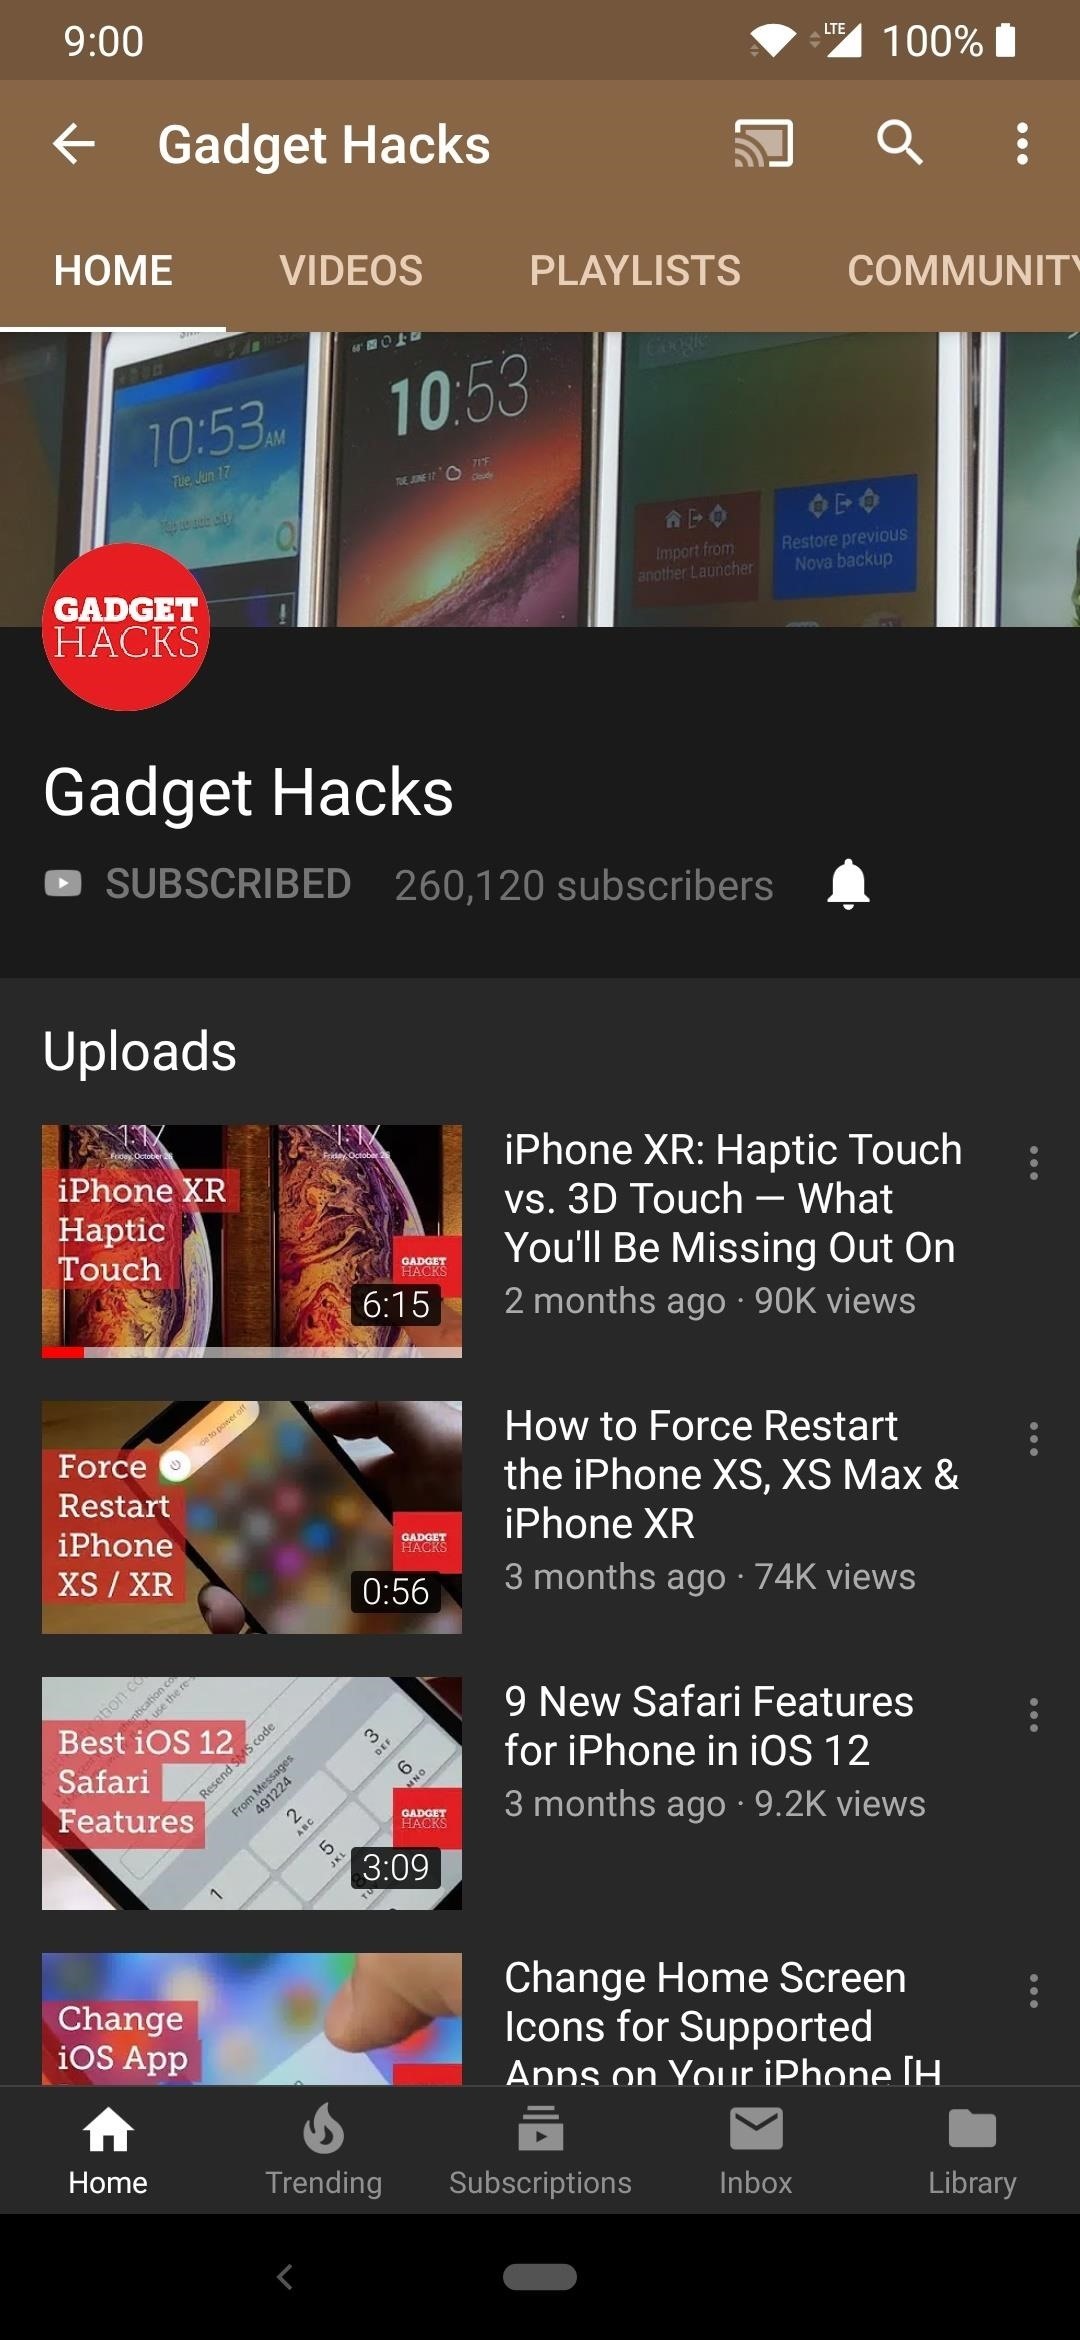 Save Up to 60% Battery Life by Enabling Dark Mode in the YouTube App